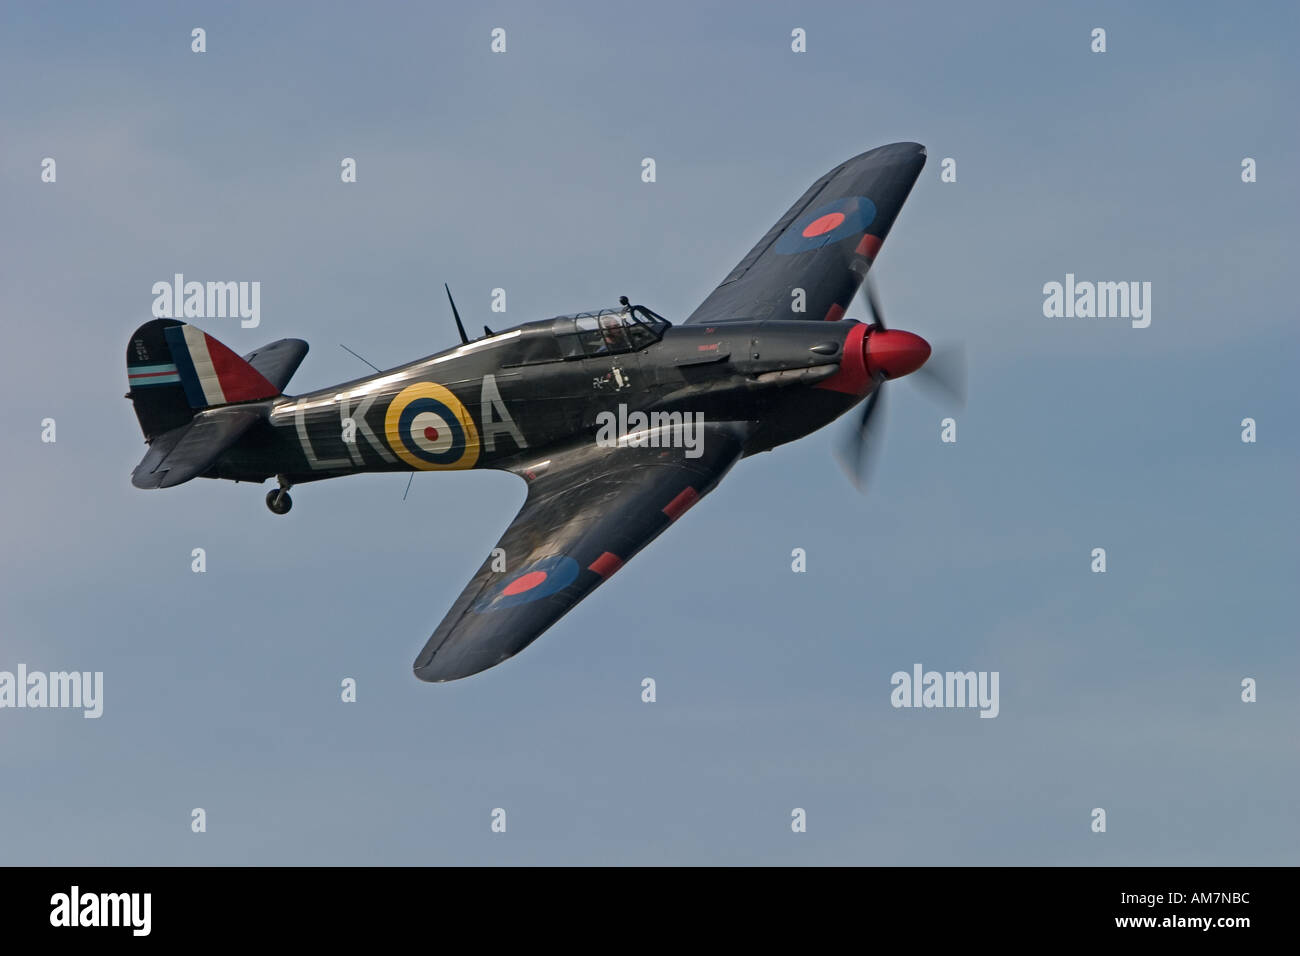 Hawker Hurricane Mk XII RCAF5589 built in Canada 1943. This aircraft, registered G-HURR, crashed in 2007 during a  display at Shoreham. Stock Photo